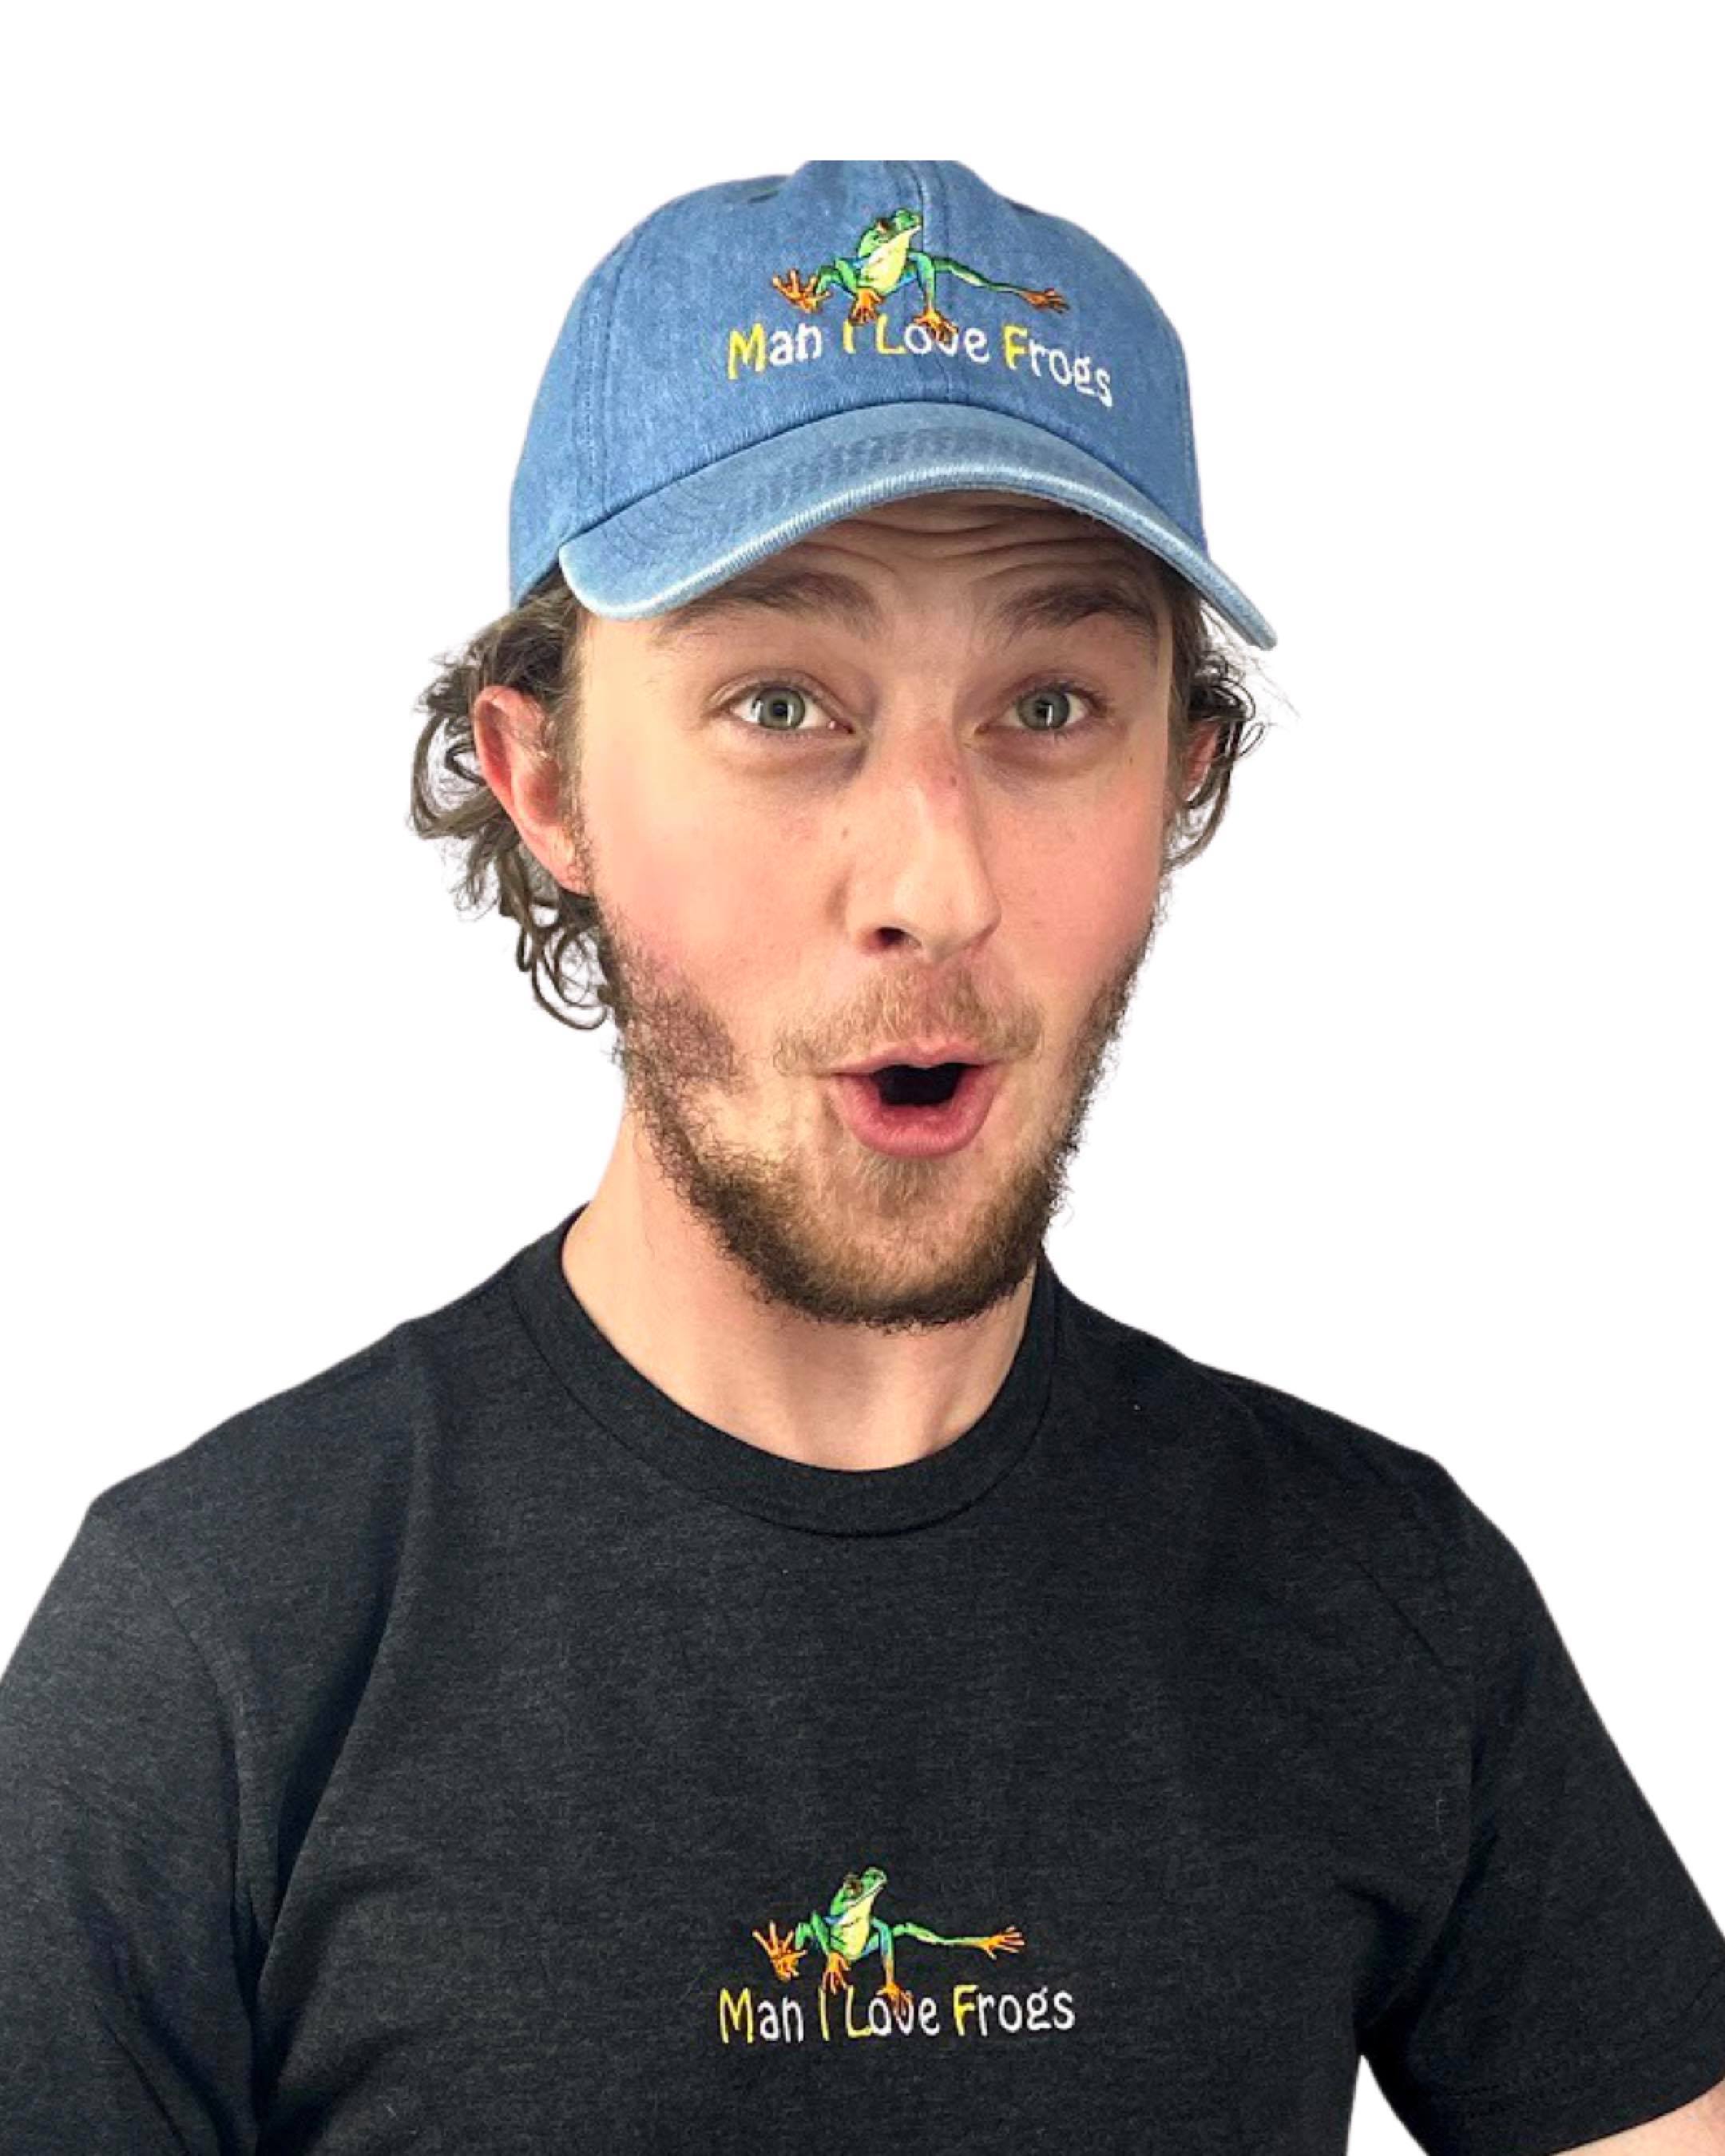 Man I Love Frogs MILF Embroidered Denim Dad Hat, One Size Fits All